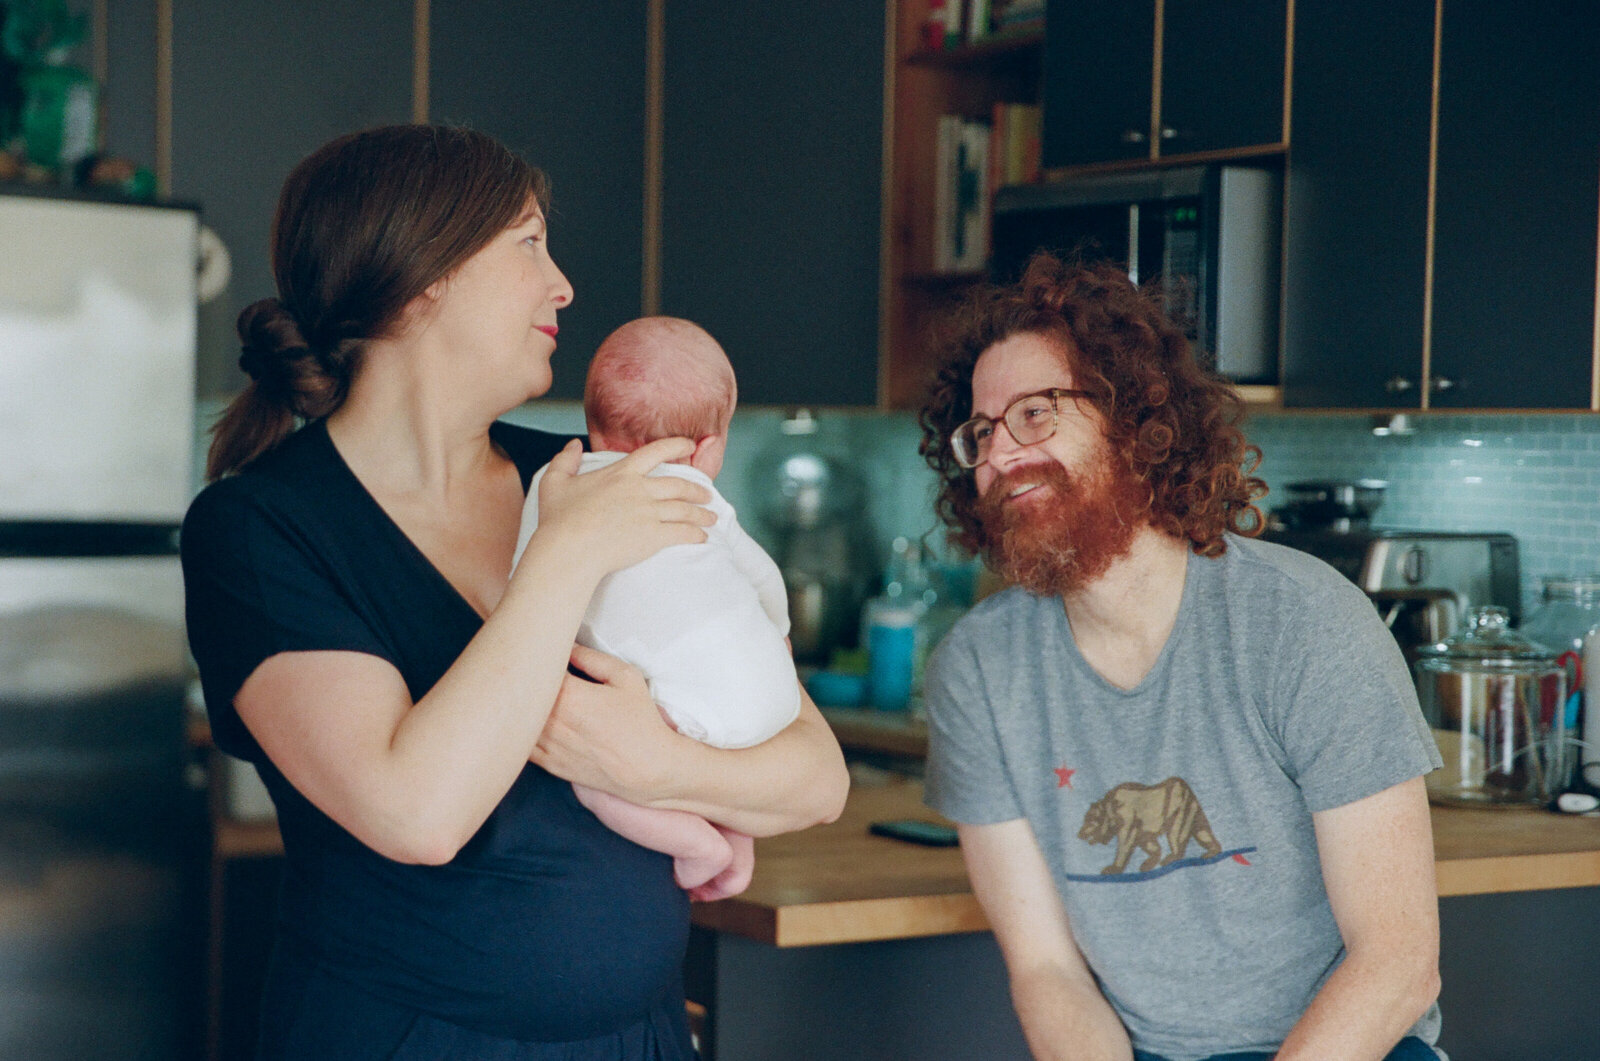 mom in navy jumpsuit holding newborn baby girl while dad with curly red hair and beard smiles happily at them